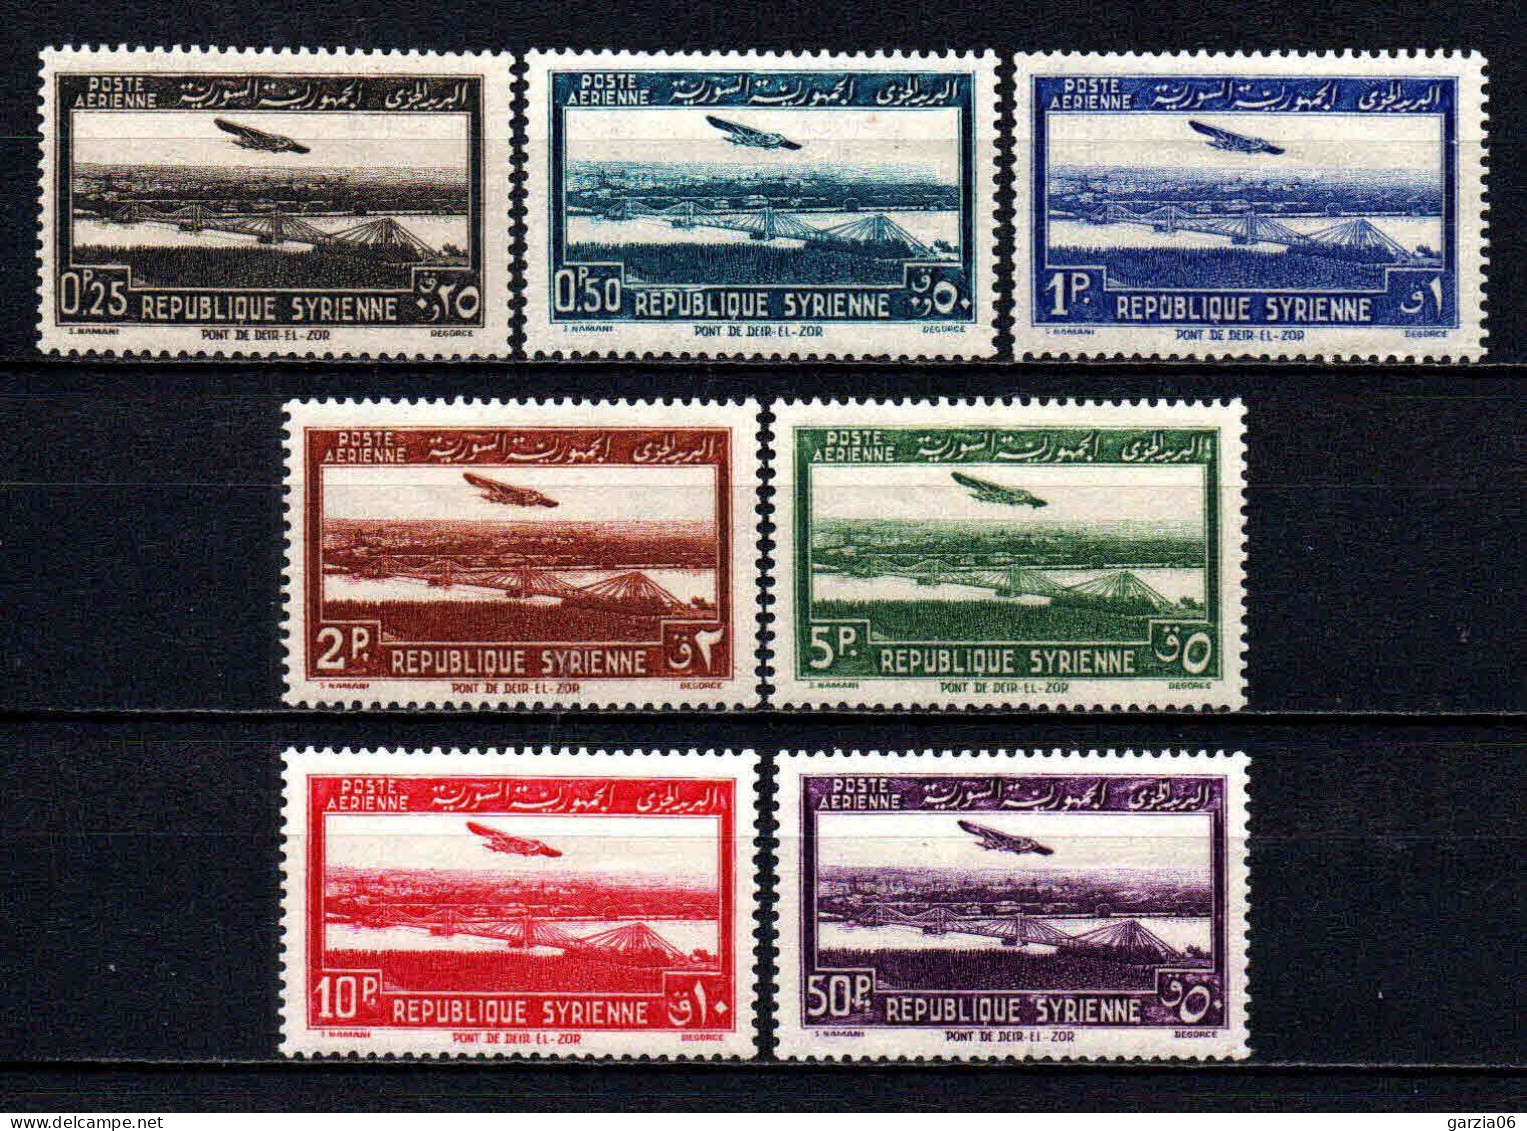 Syrie - 1940 - PA 87 à 93  - Neuf * - MLH - Airmail